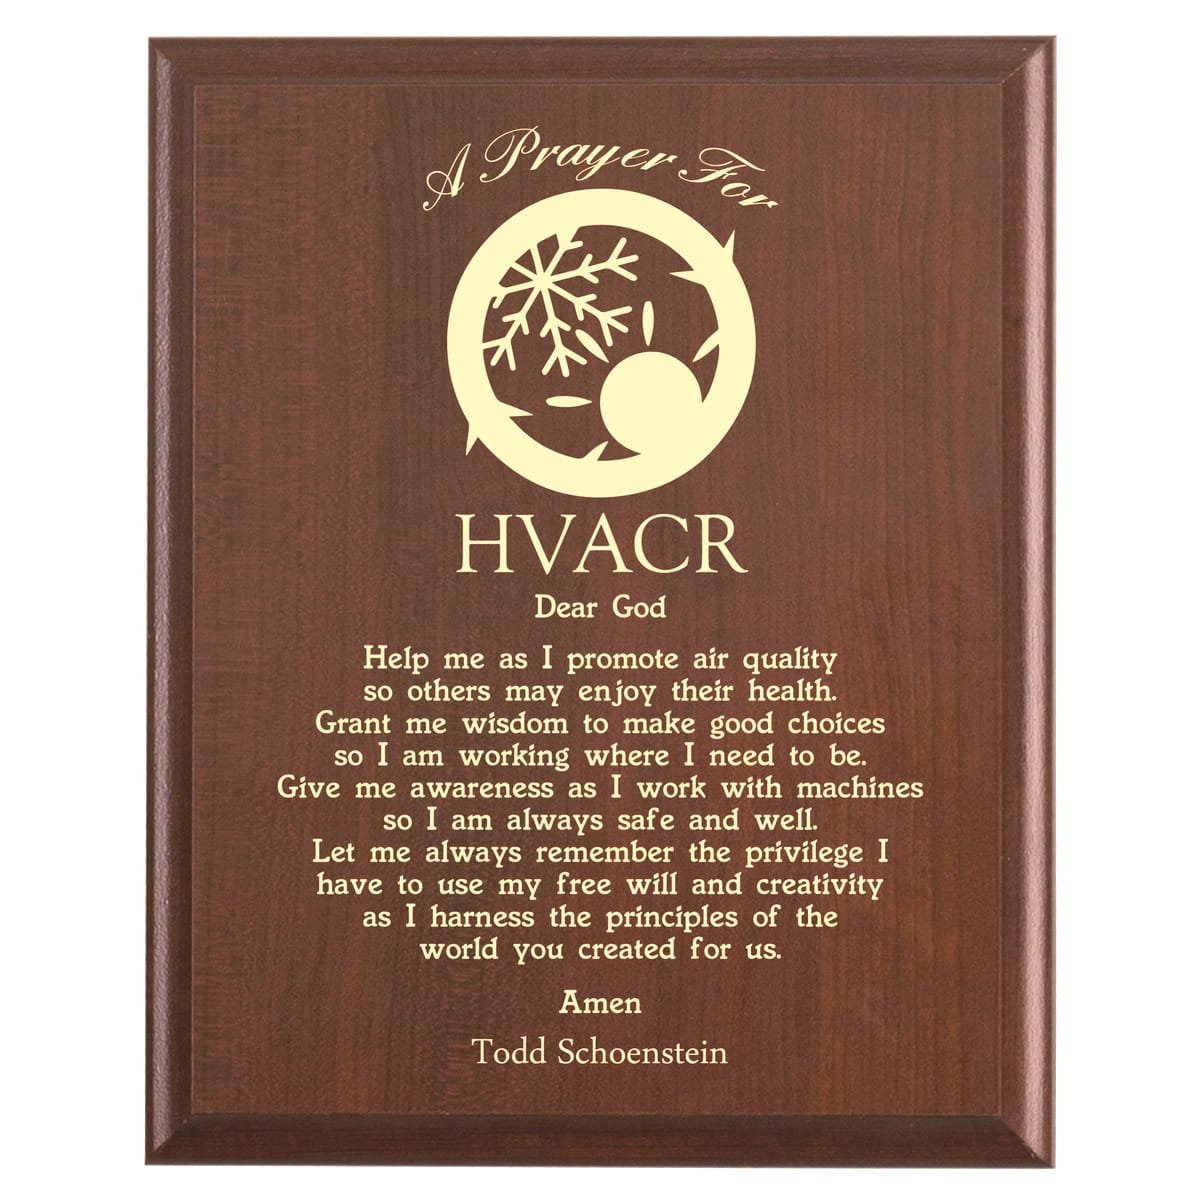 Plaque photo: HVACR Prayer Plaque design with free personalization. Wood style finish with customized text.